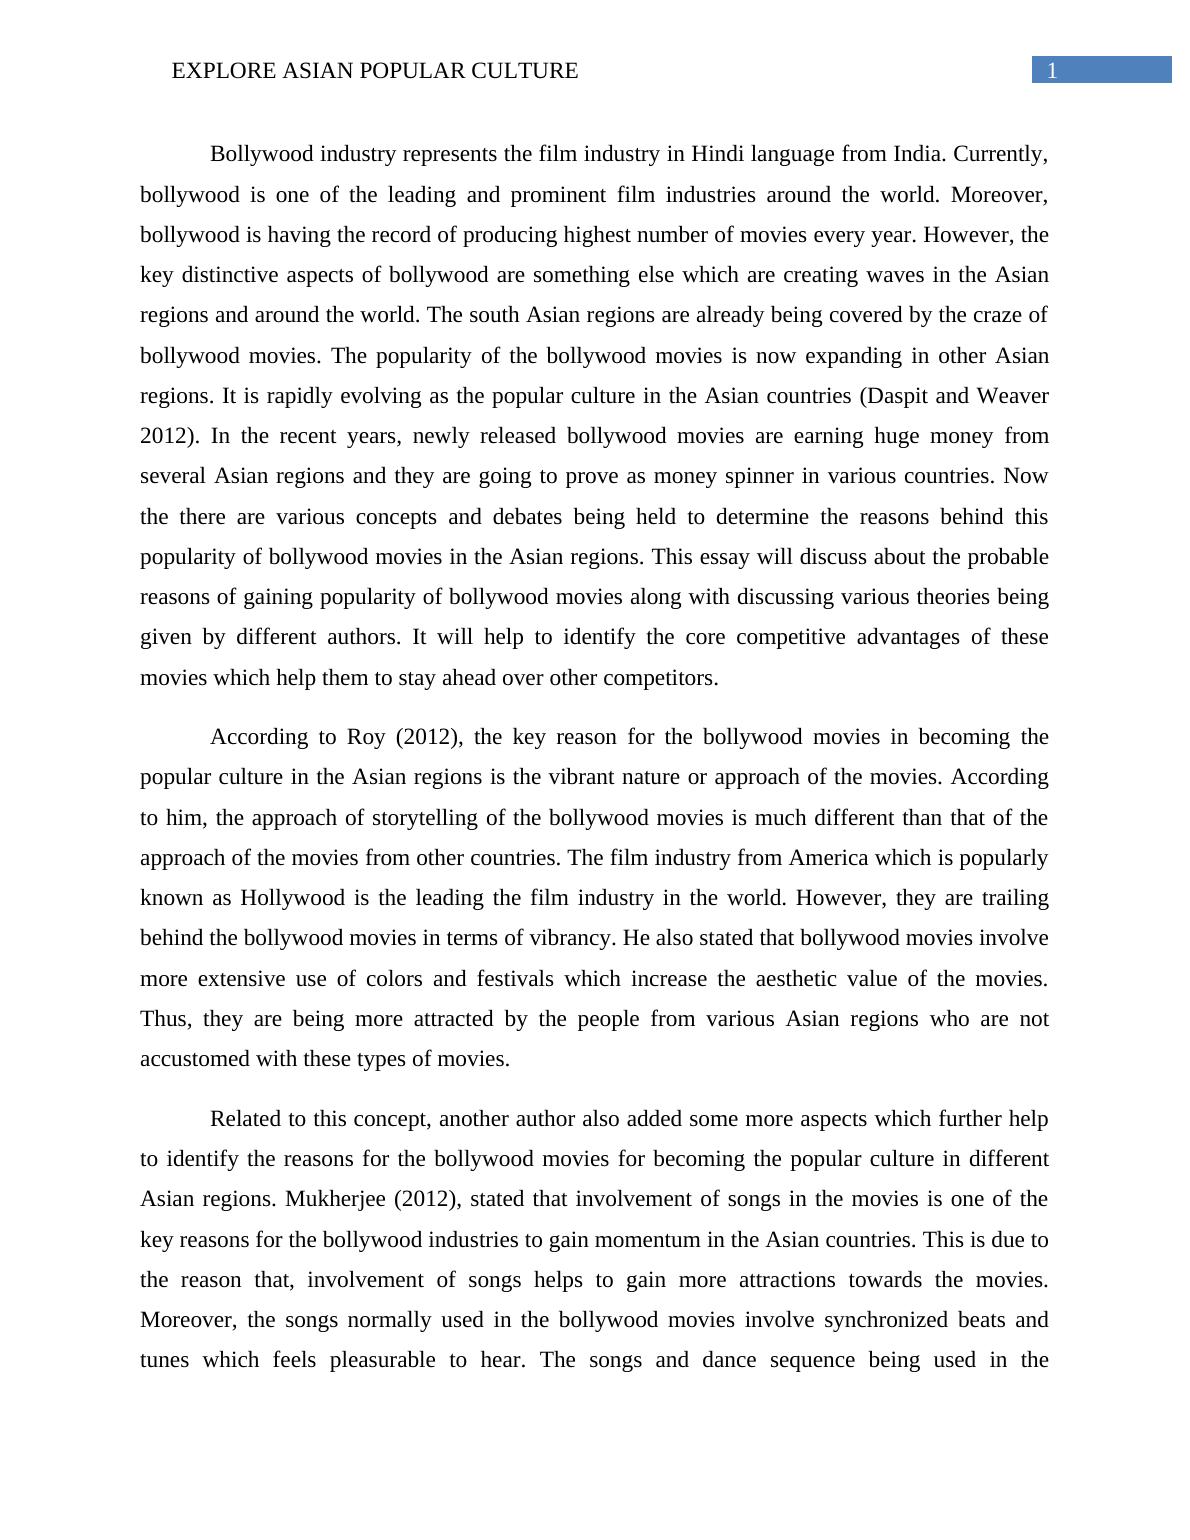 essay on bollywood movies in english